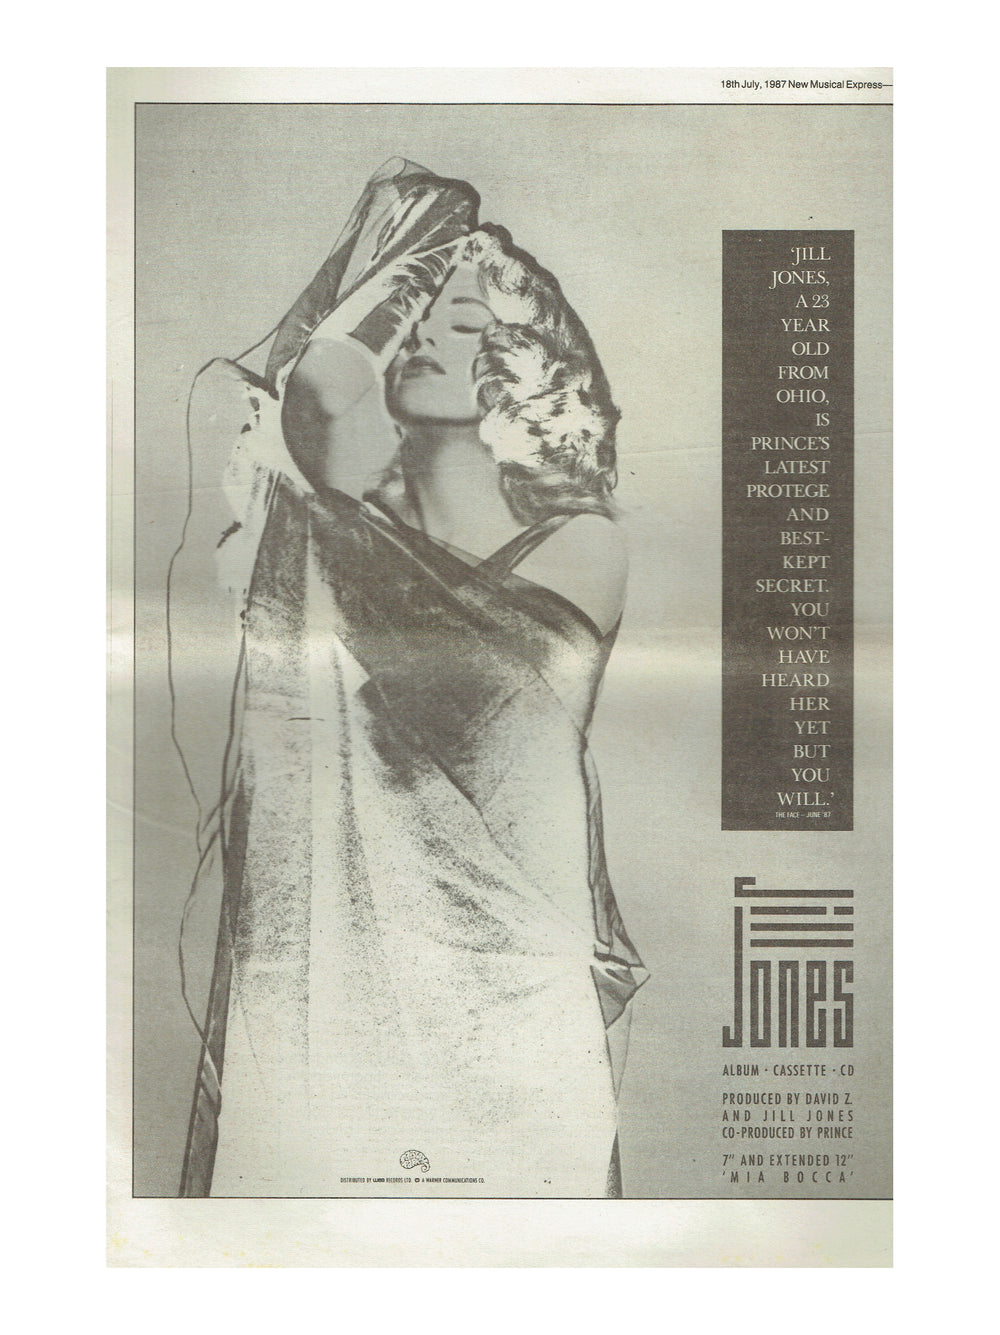 Prince – Jill Jones Full Page Official Advert NME Newspaper July 18th 1987 Prince